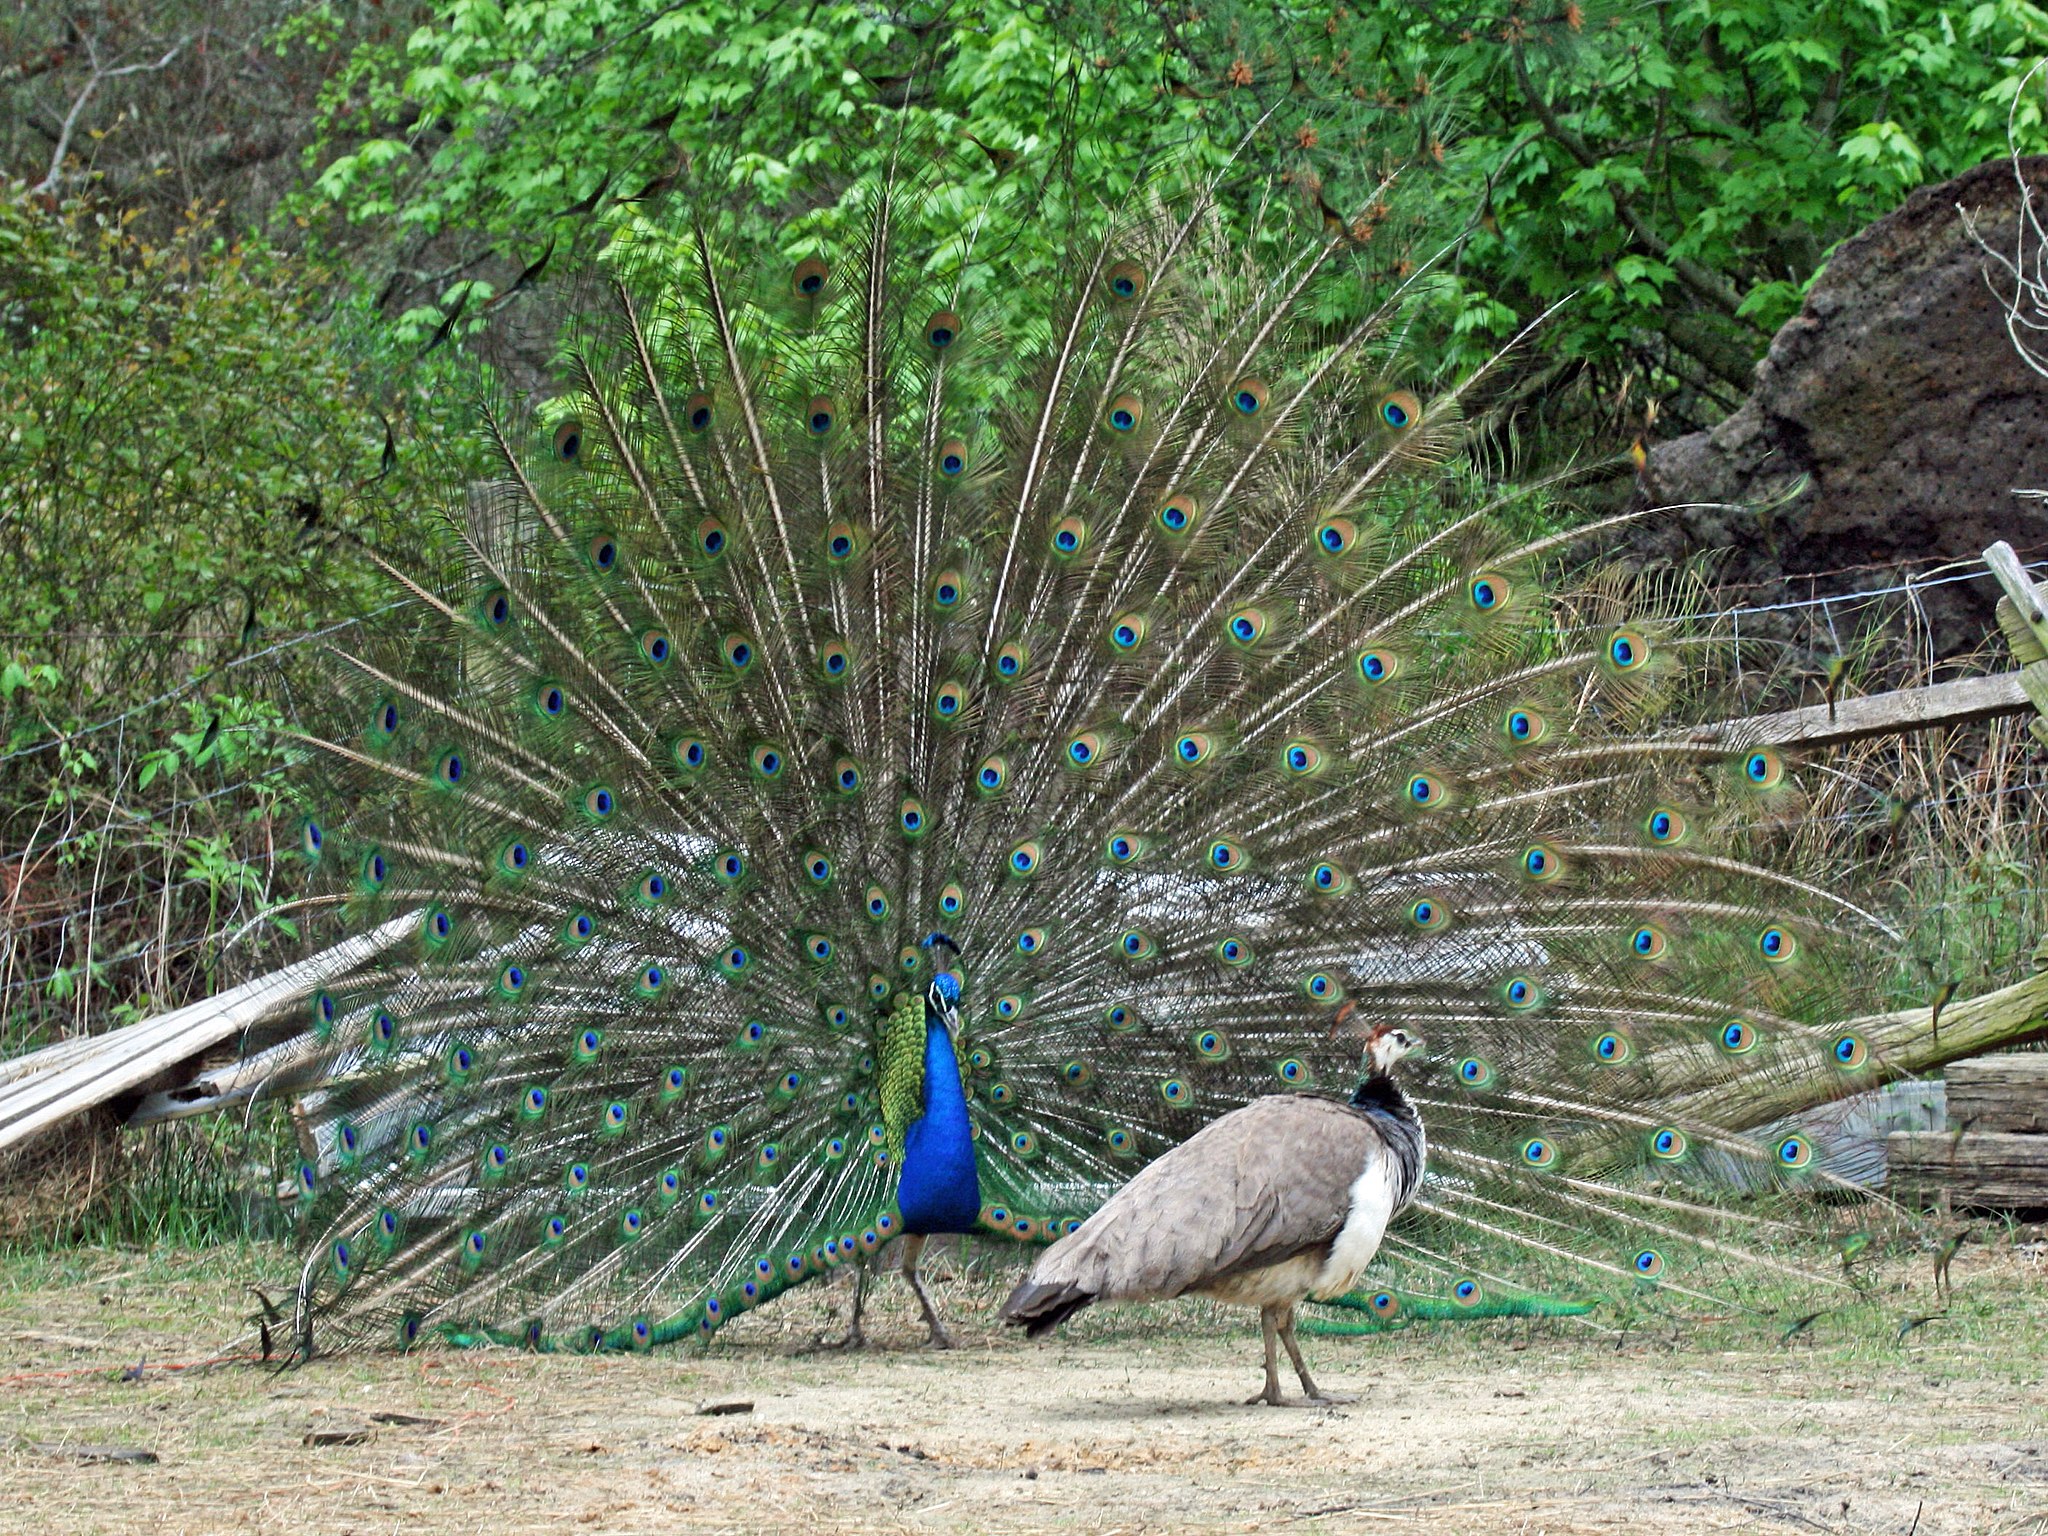 Photo depicts a male and female peacock